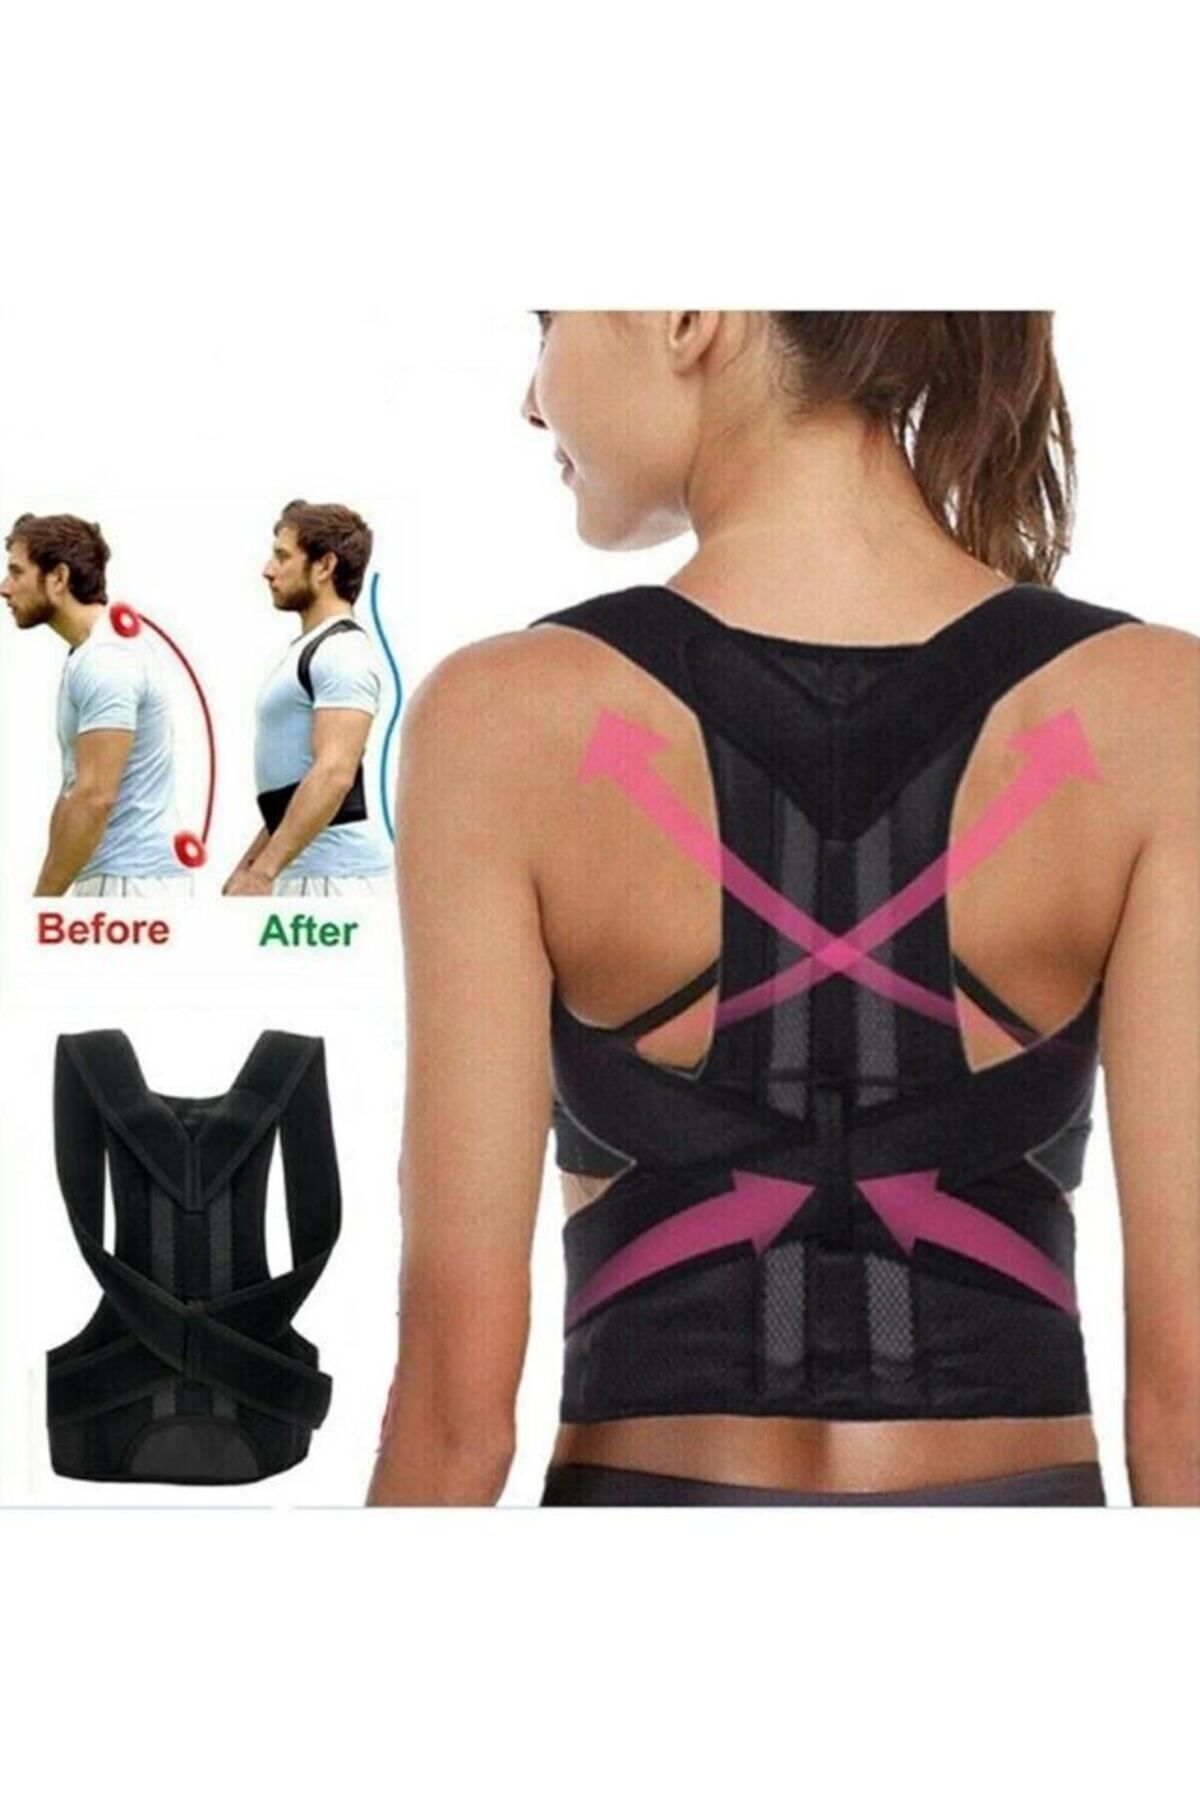 FİT WOMEN Medical Upright Posture Back-Waist Corset for Women and